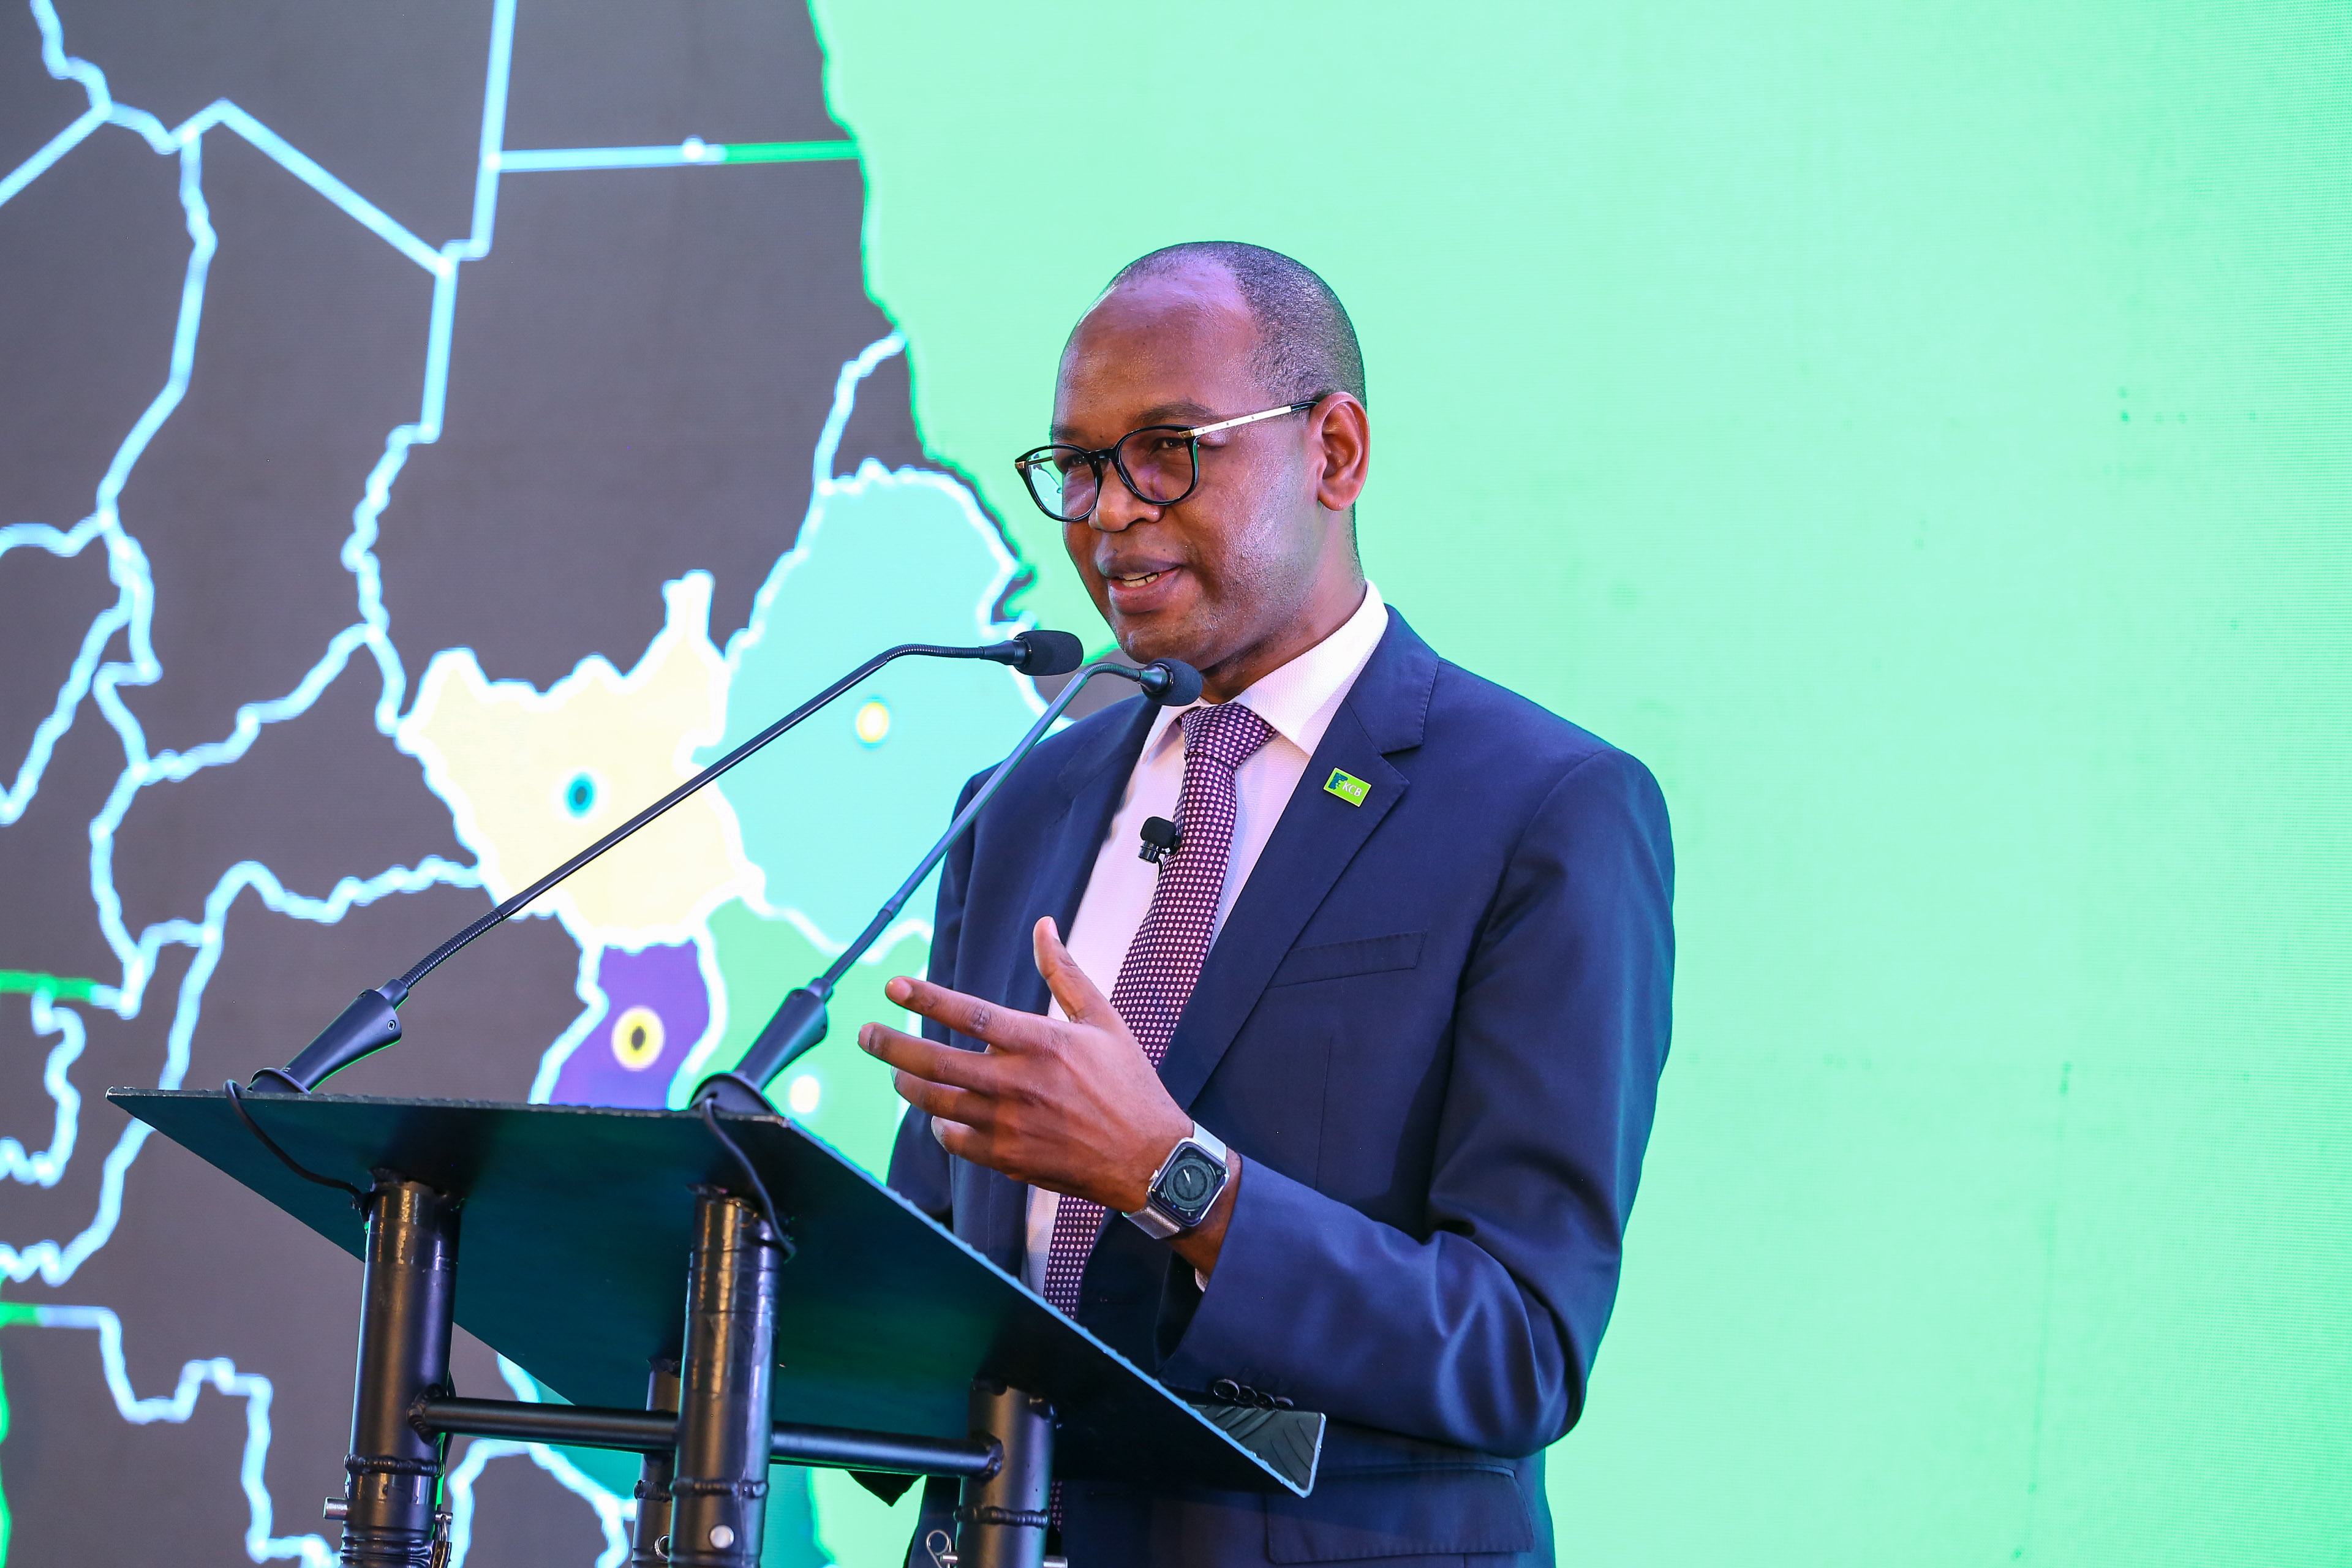 KCB Group Plc Merges Rwanda Operations Following Approval of BPR Acquisition